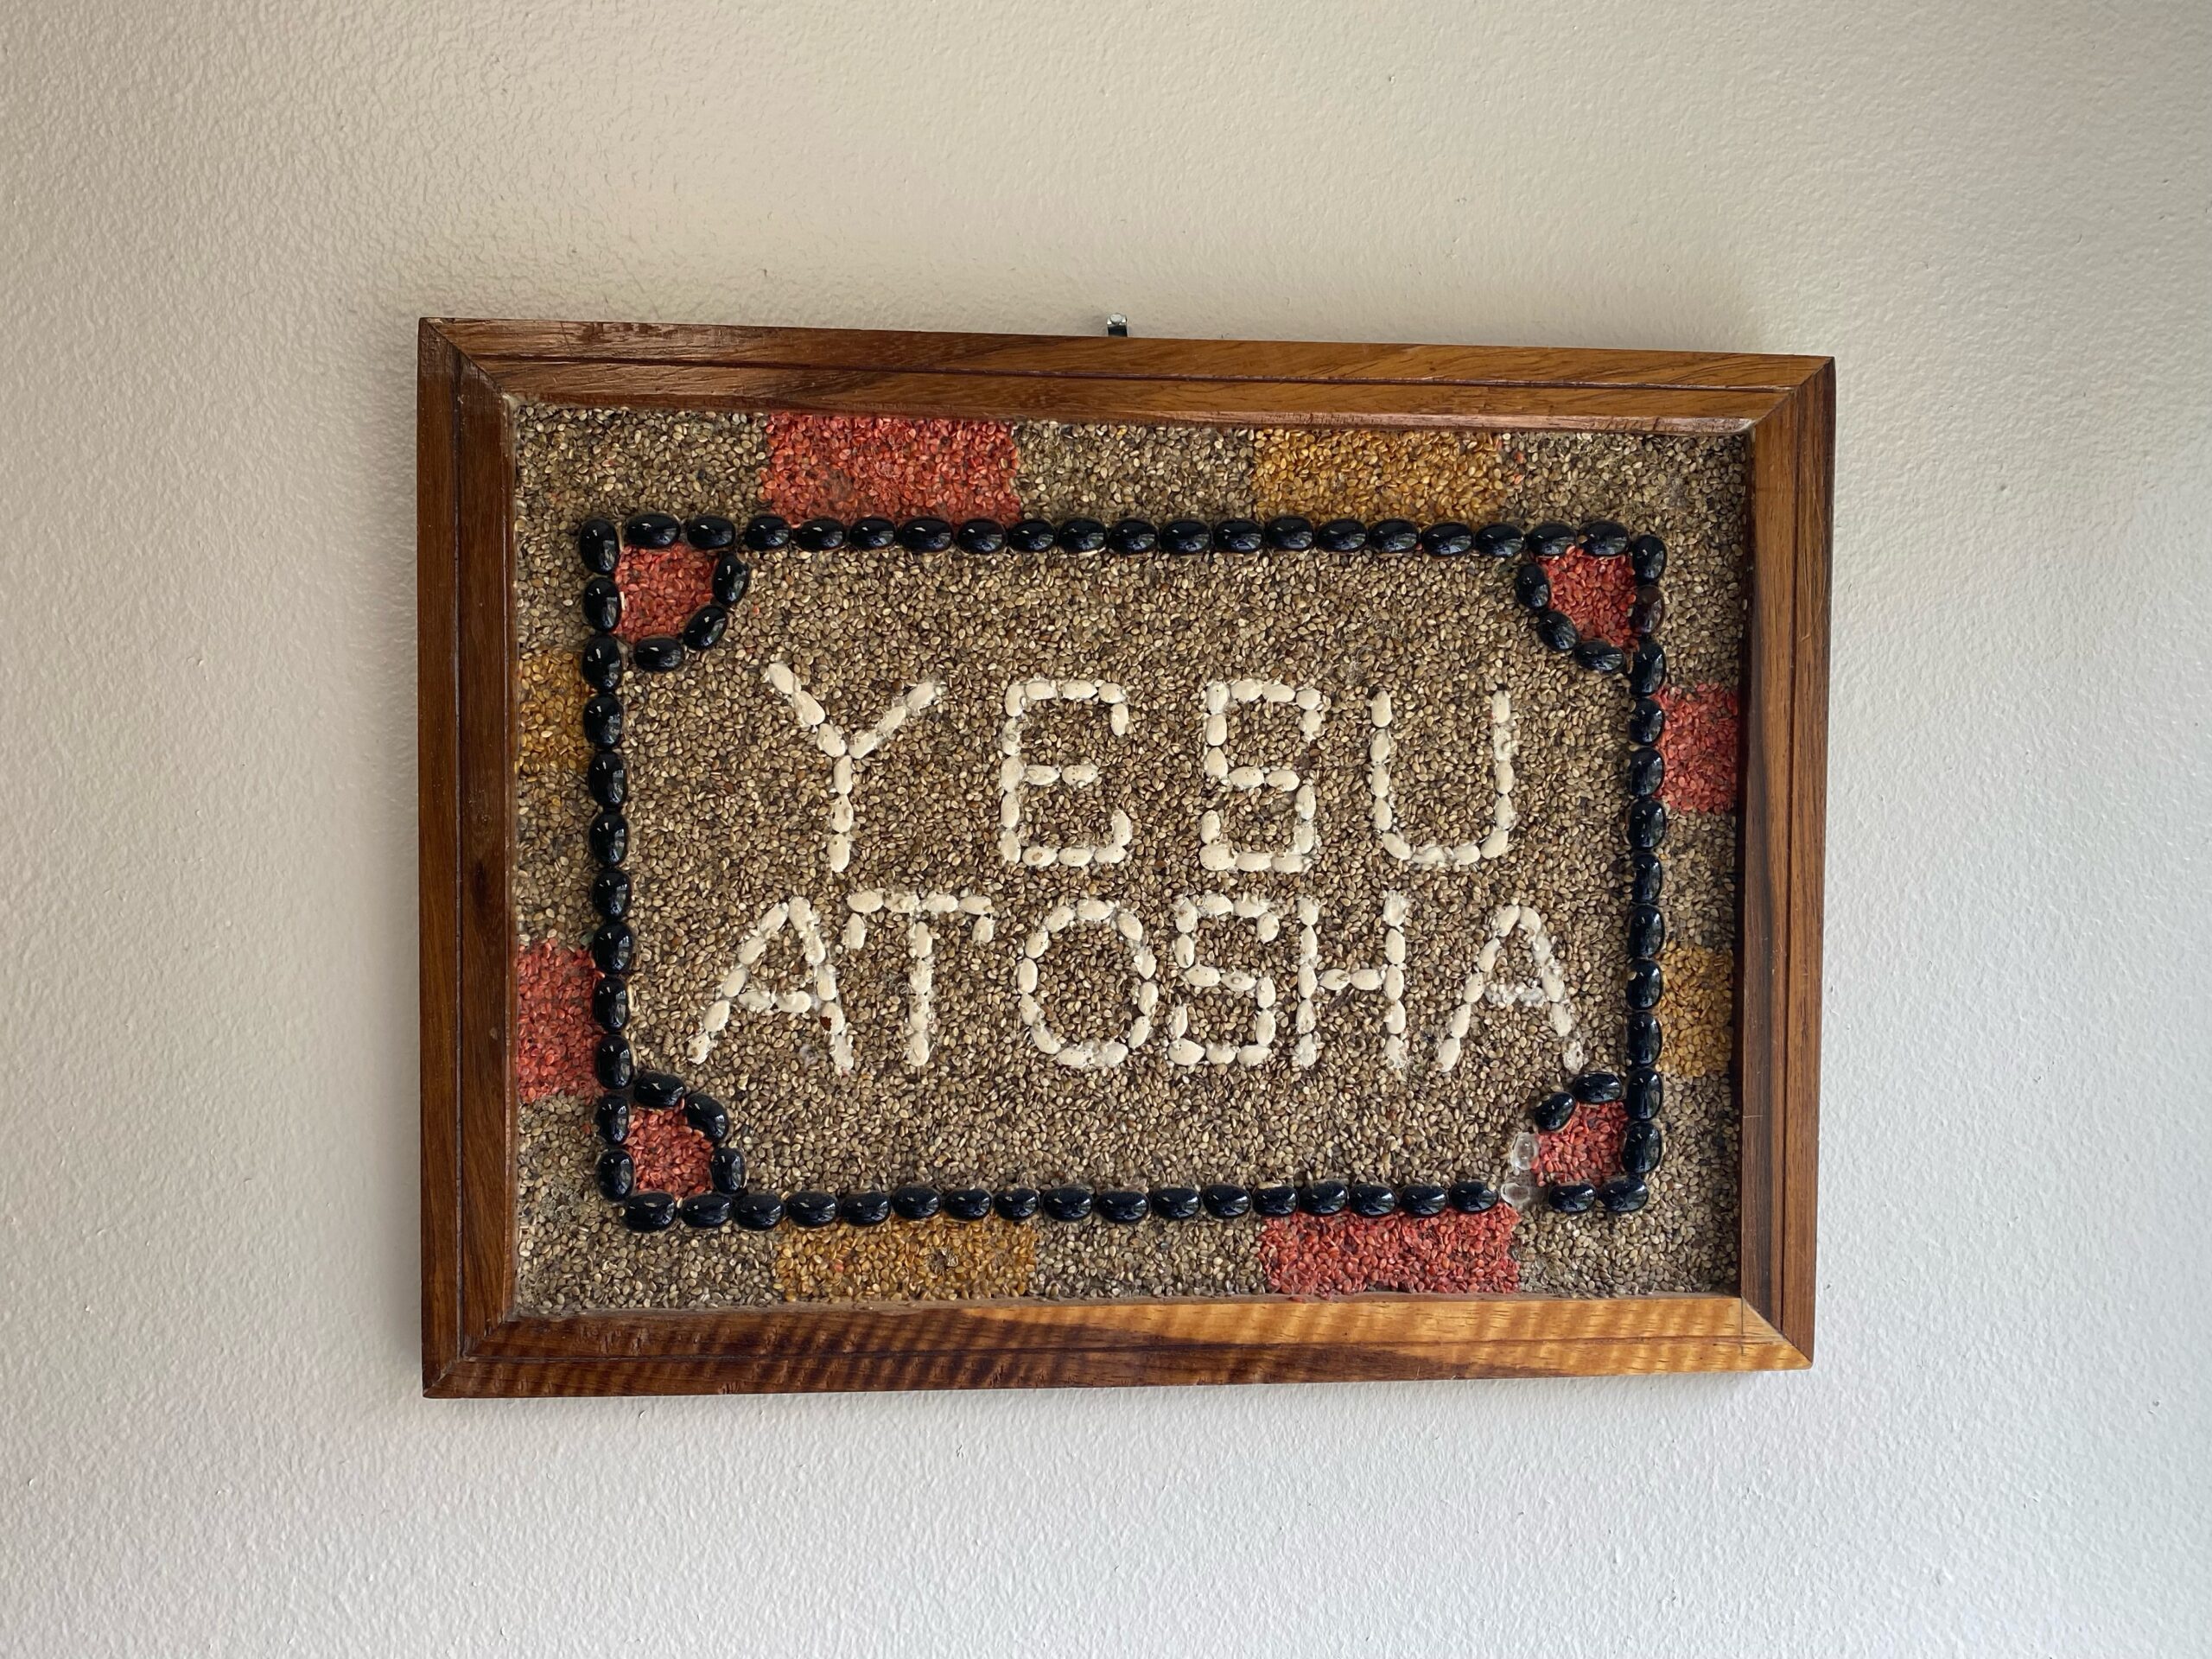 Framed picture with the words Yesu Atosha on it. Meaning Jesus is Enough